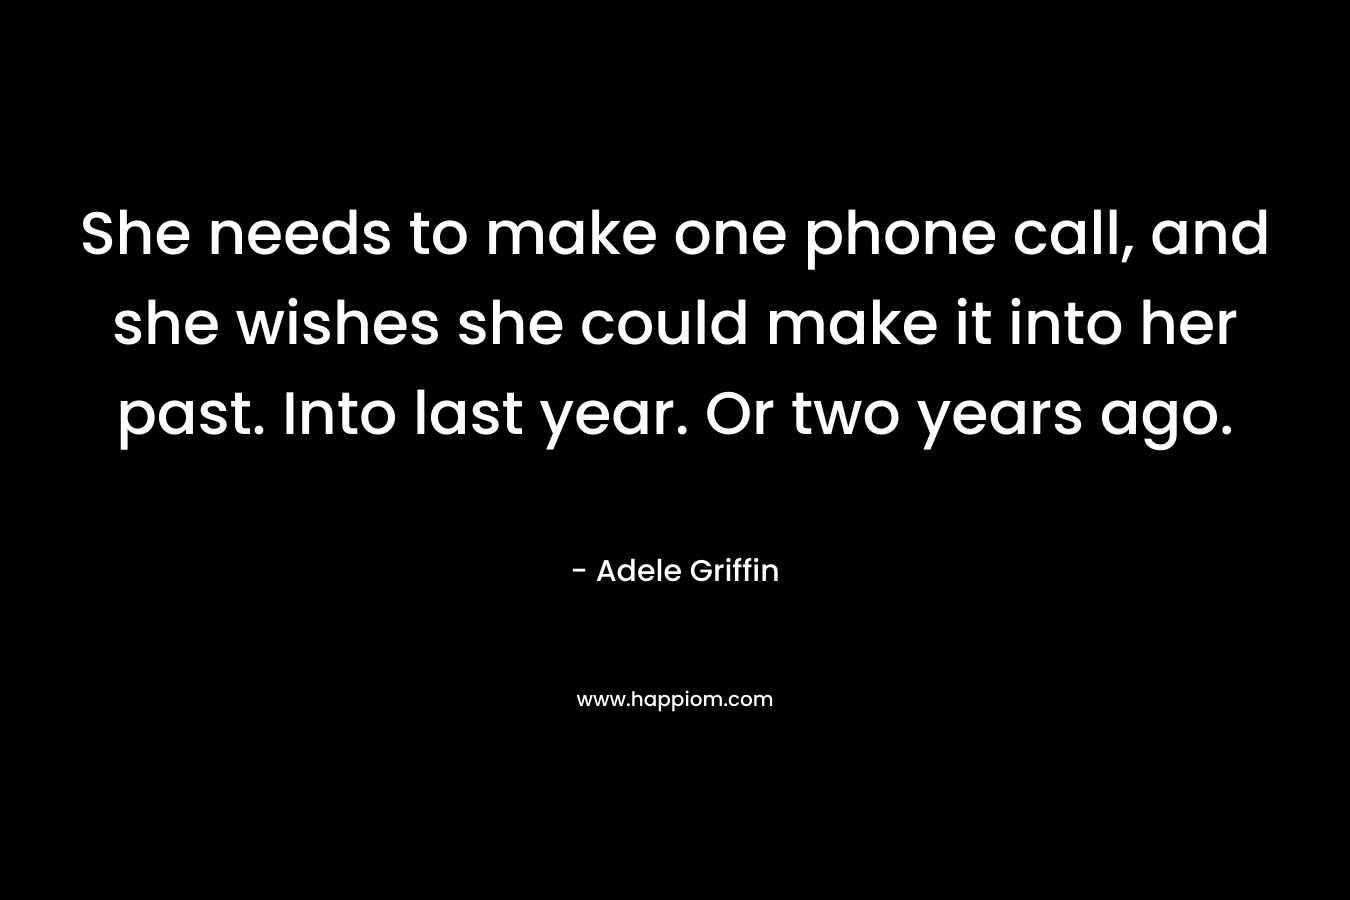 She needs to make one phone call, and she wishes she could make it into her past. Into last year. Or two years ago. – Adele Griffin